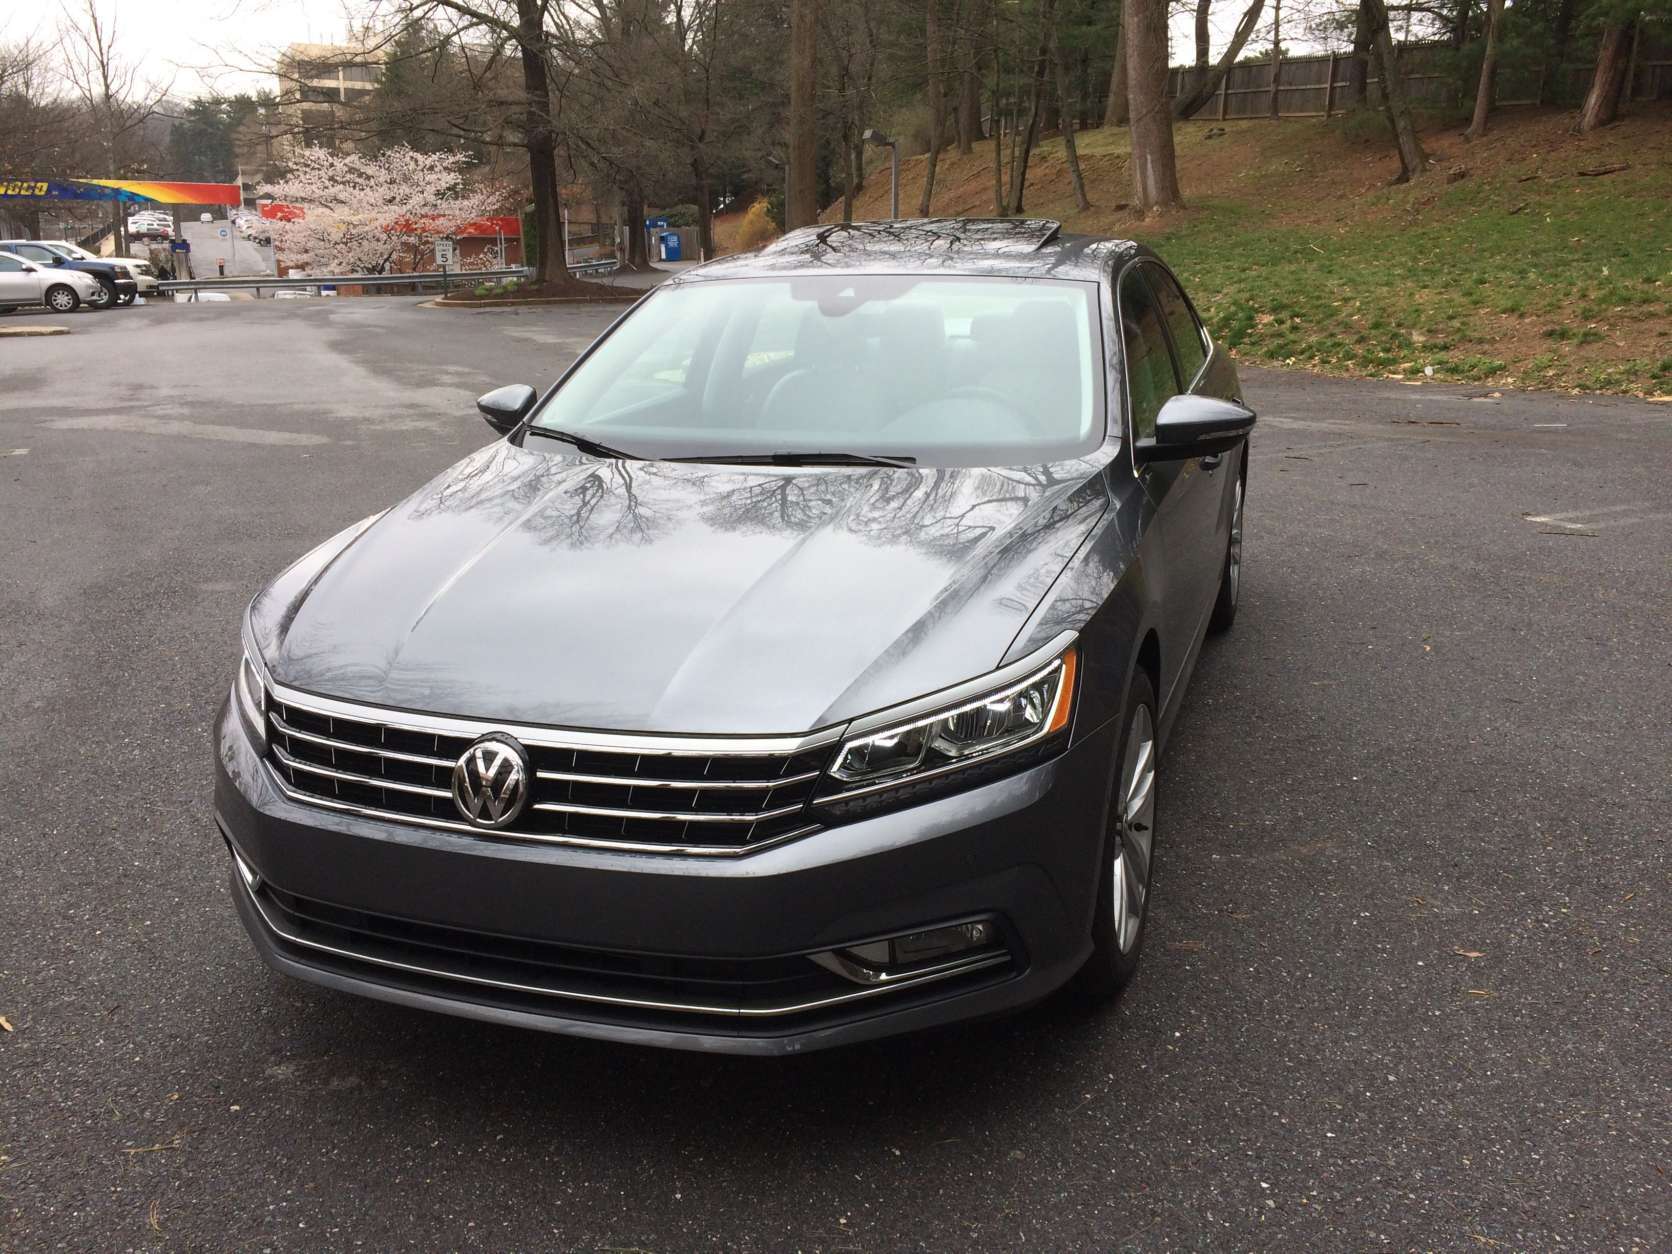 The Passat styling is pretty conservative compared to some of the models in the midsize sedan class. The $34,815 SEL Premium trim level, however, looks a bit flashier compared to other Passat models. (WTOP/Mike Parris) 